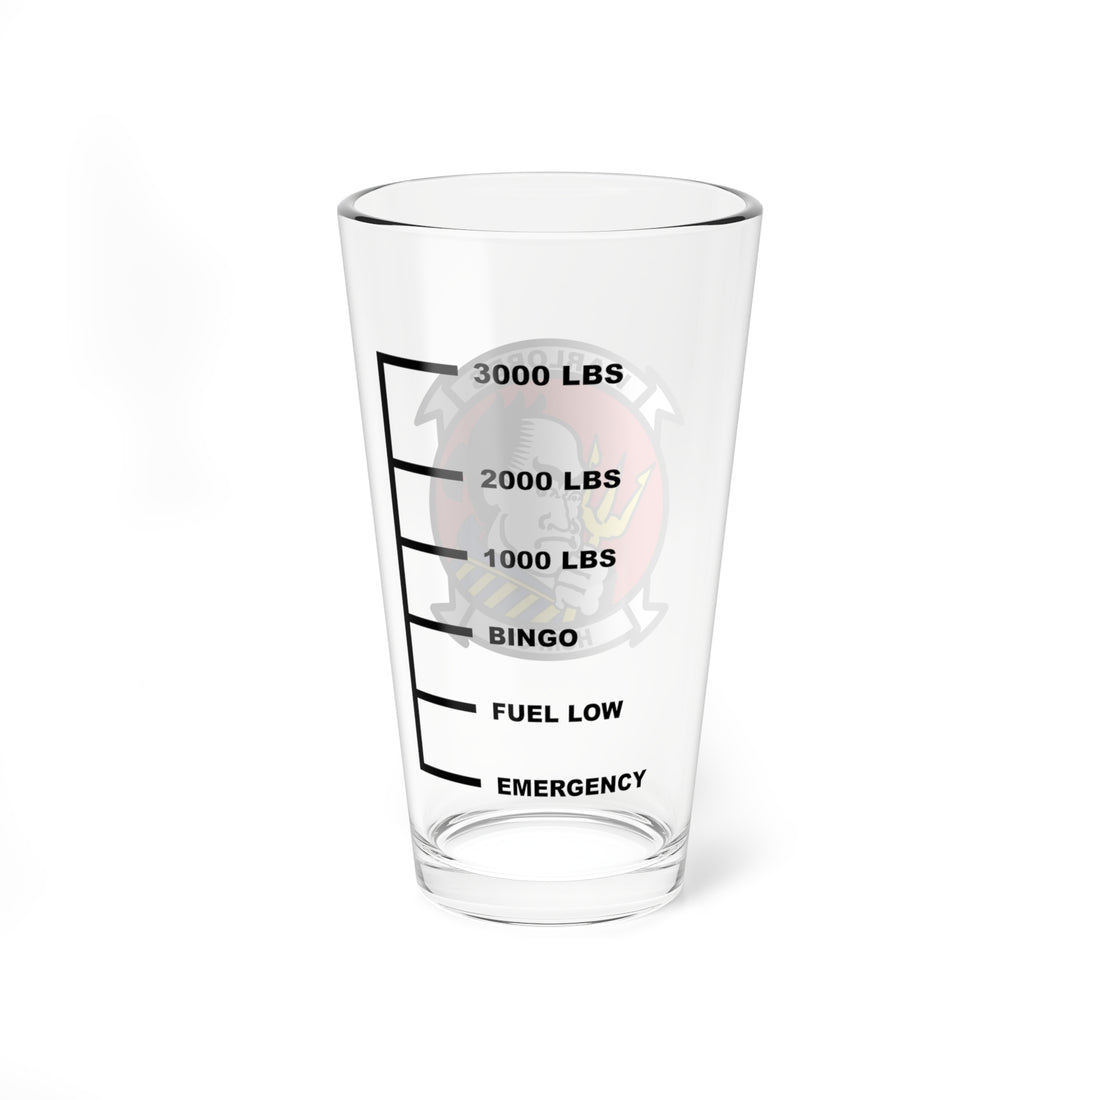 HSM-51 "Warlords" Fuel Low Pint Glass, 16oz, Navy Helicopter Maritime Strike Squadron flying the MH-60R Seahawk